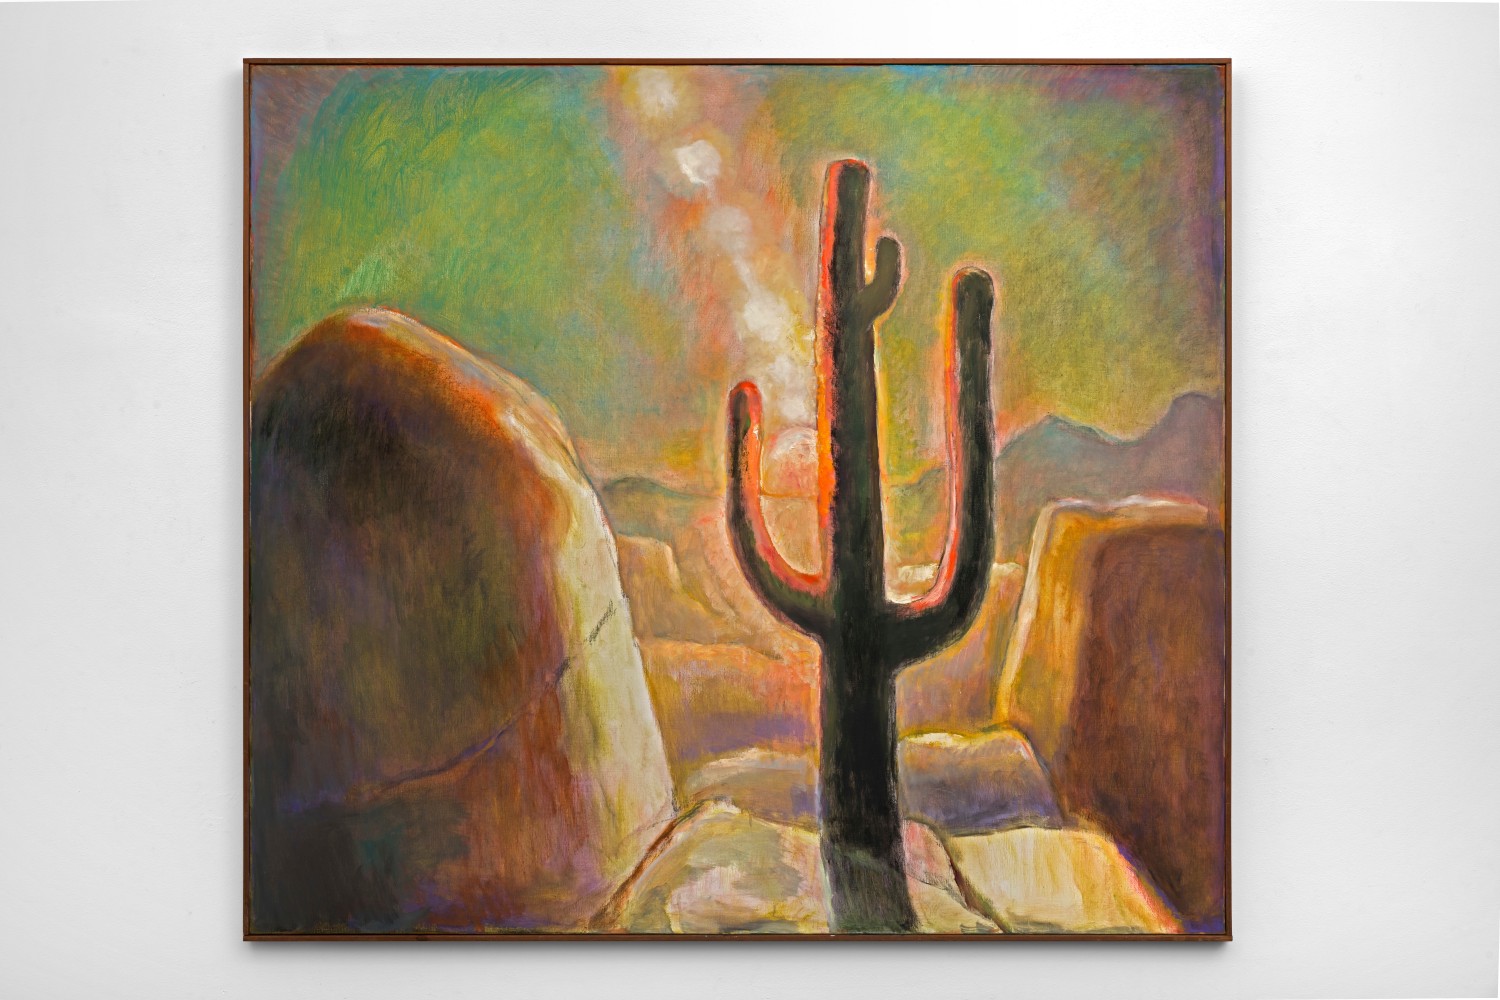 Frederick Wight (1902-1986) Solitary Saguaro, 1984  oil on canvas 48 x 54 inches;  121.9 x 137.2 centimeters LSFA# 10689